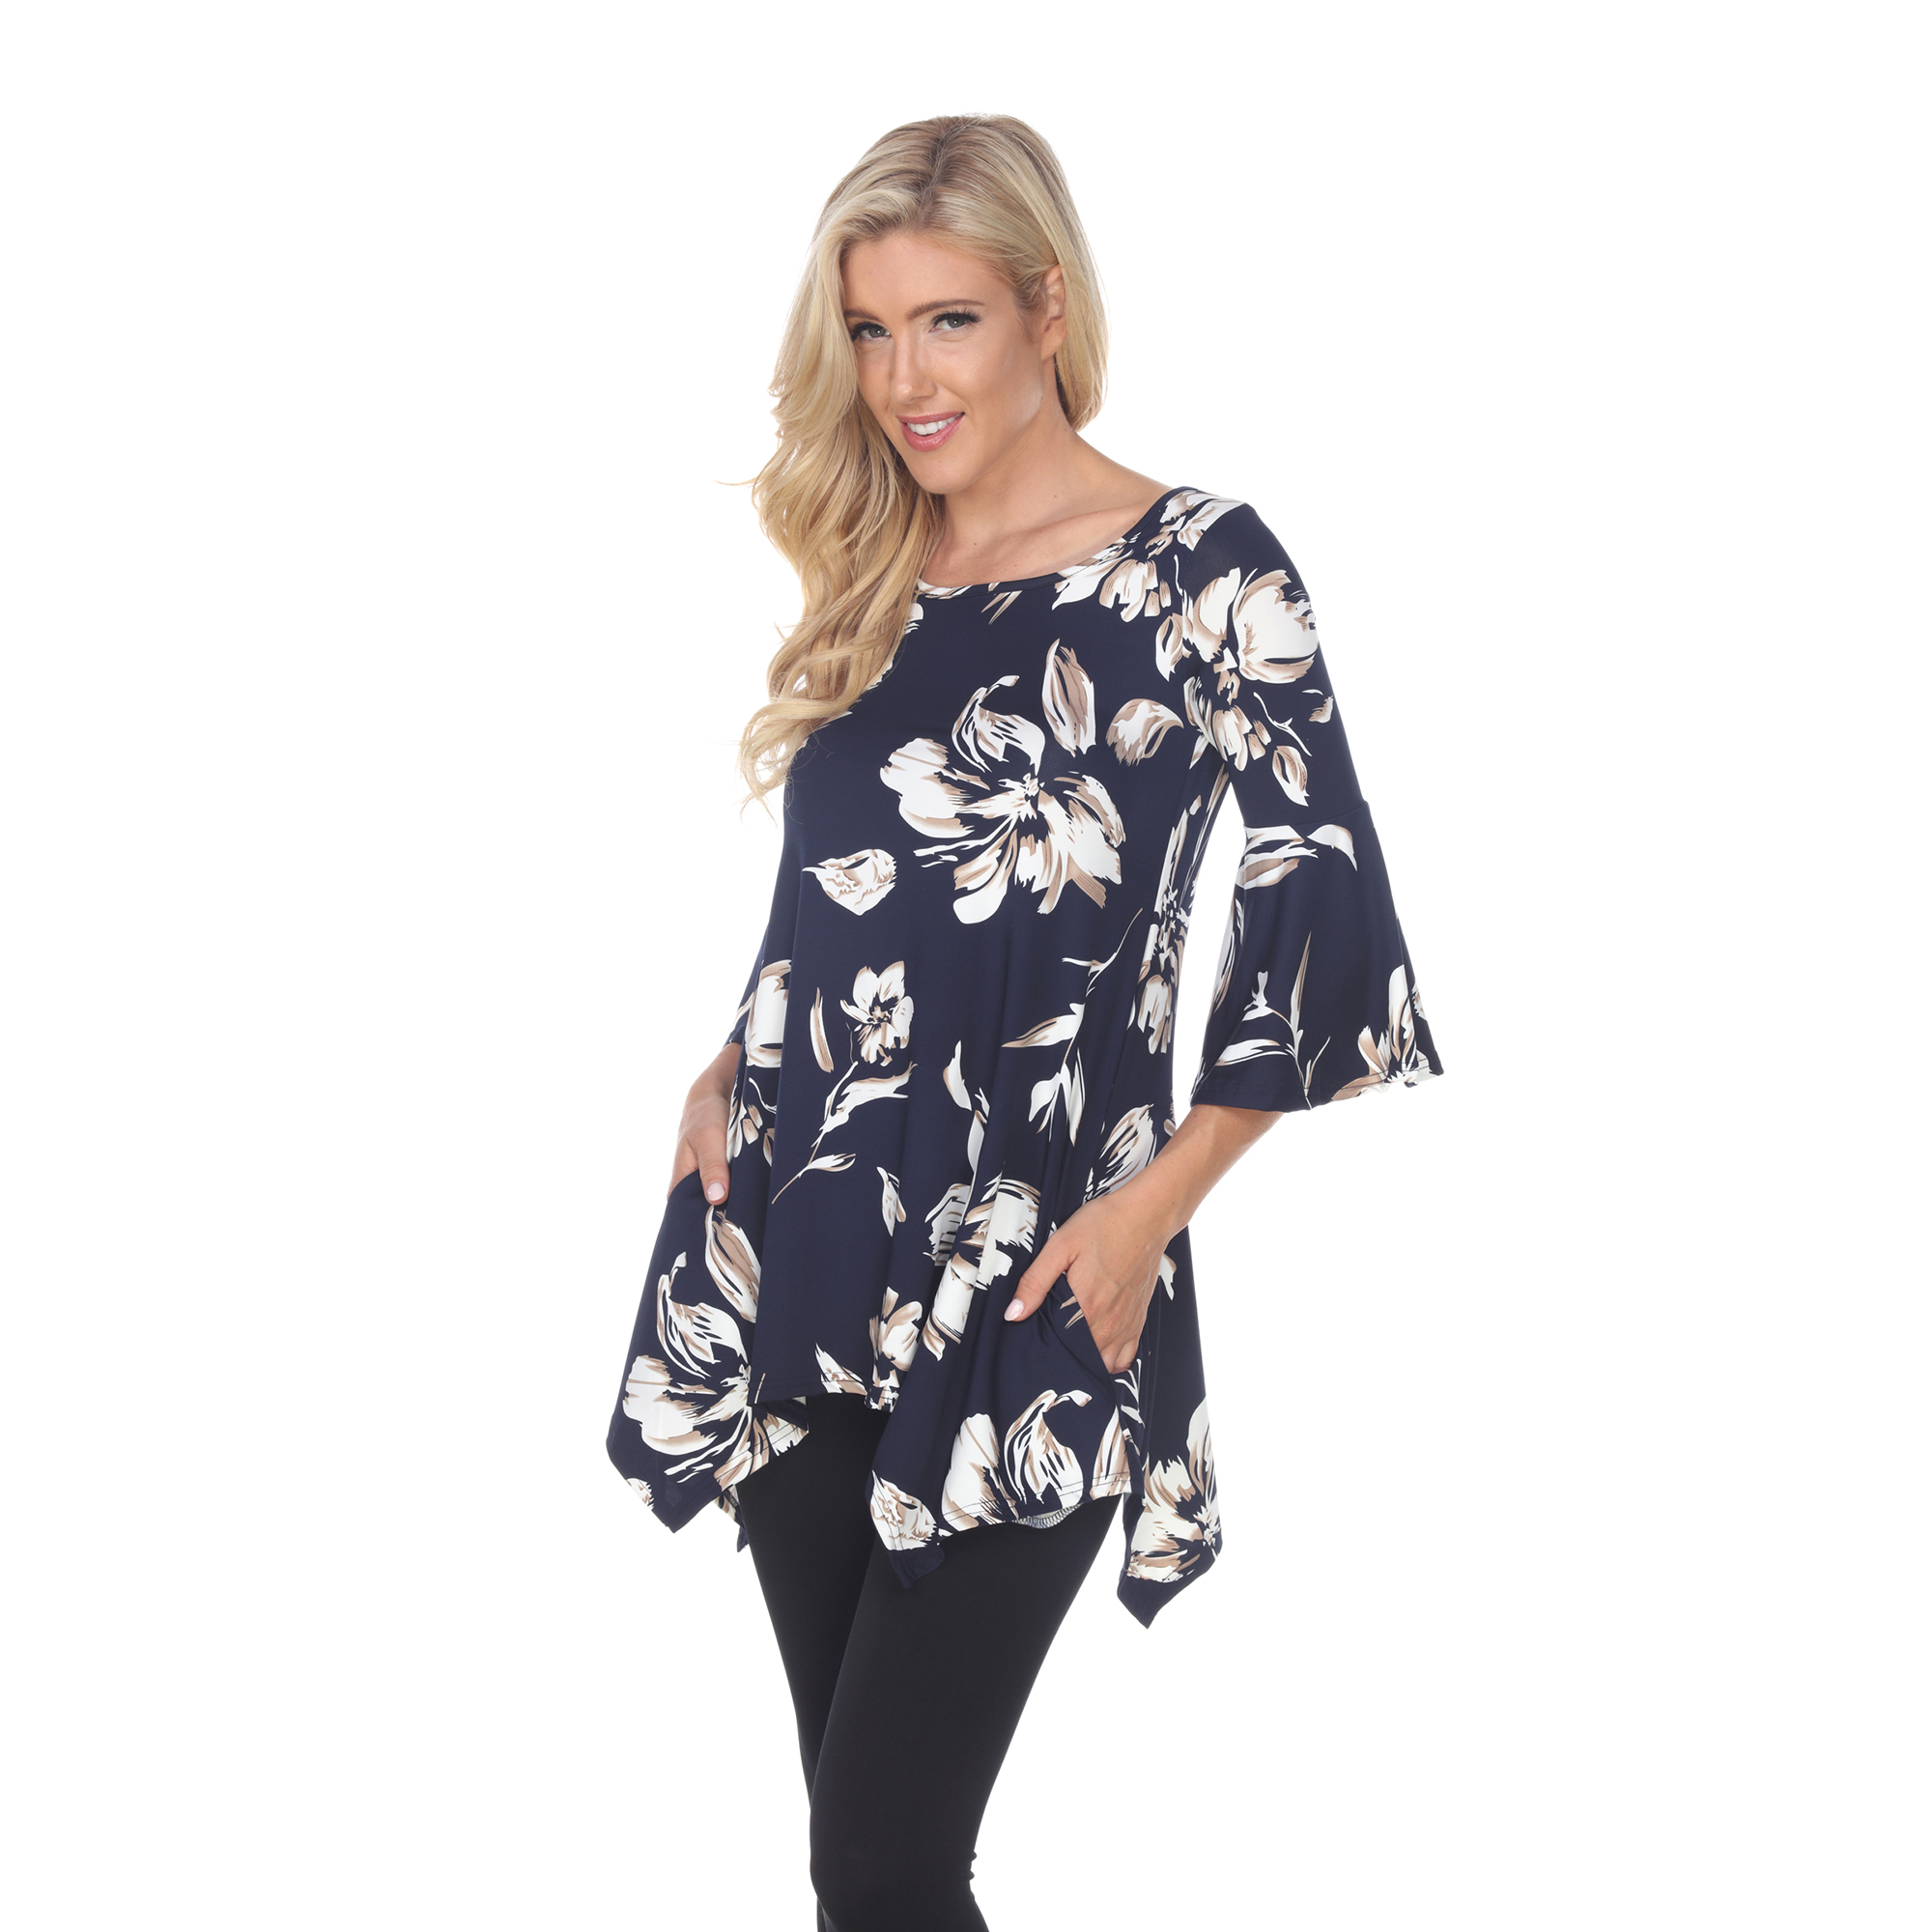 White Mark Women's Floral Print Quarter Sleeve Tunic Top With Pockets - Black, 2X